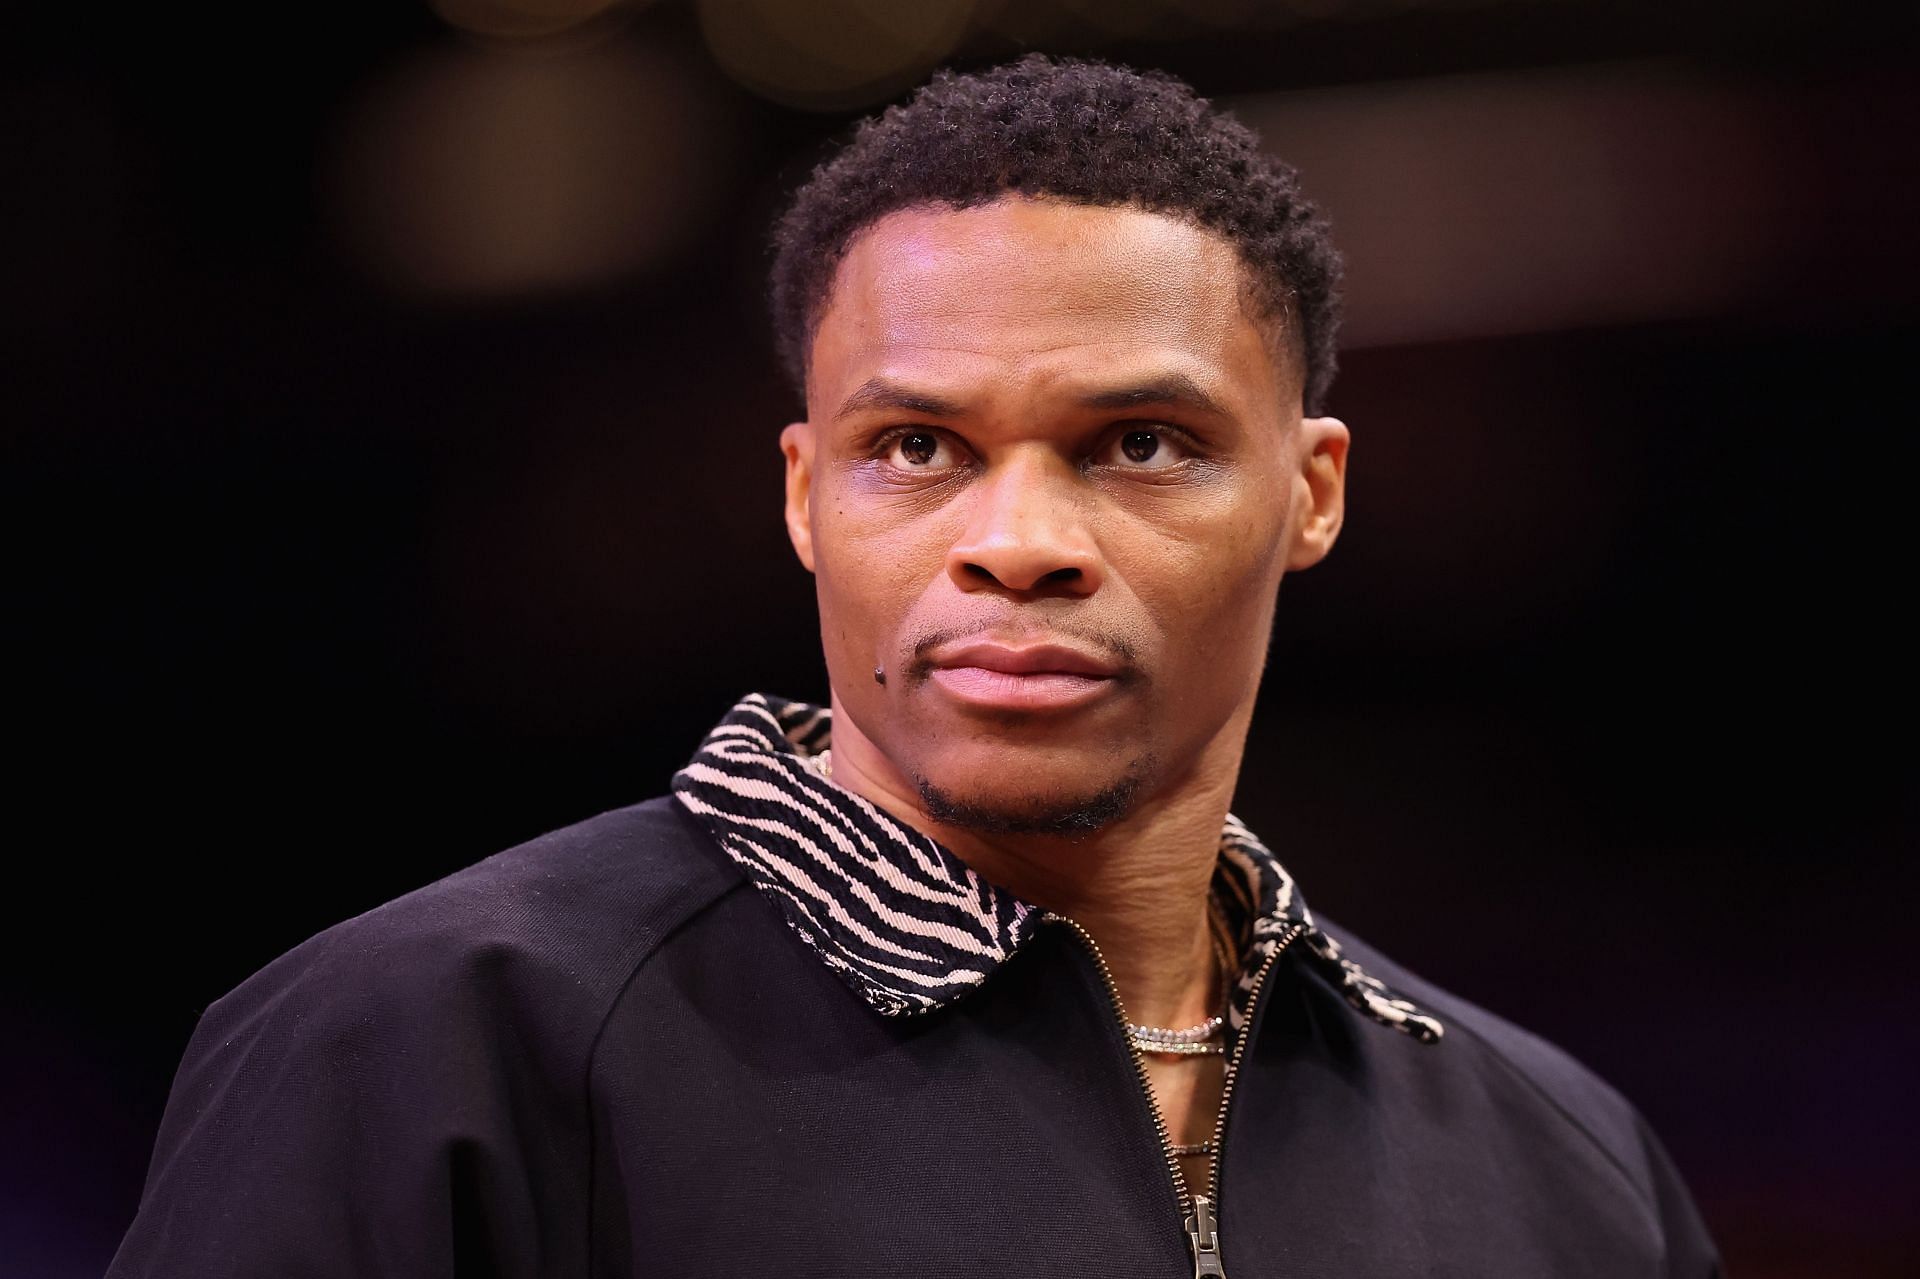 LA Clippers point guard Russell Westbrook